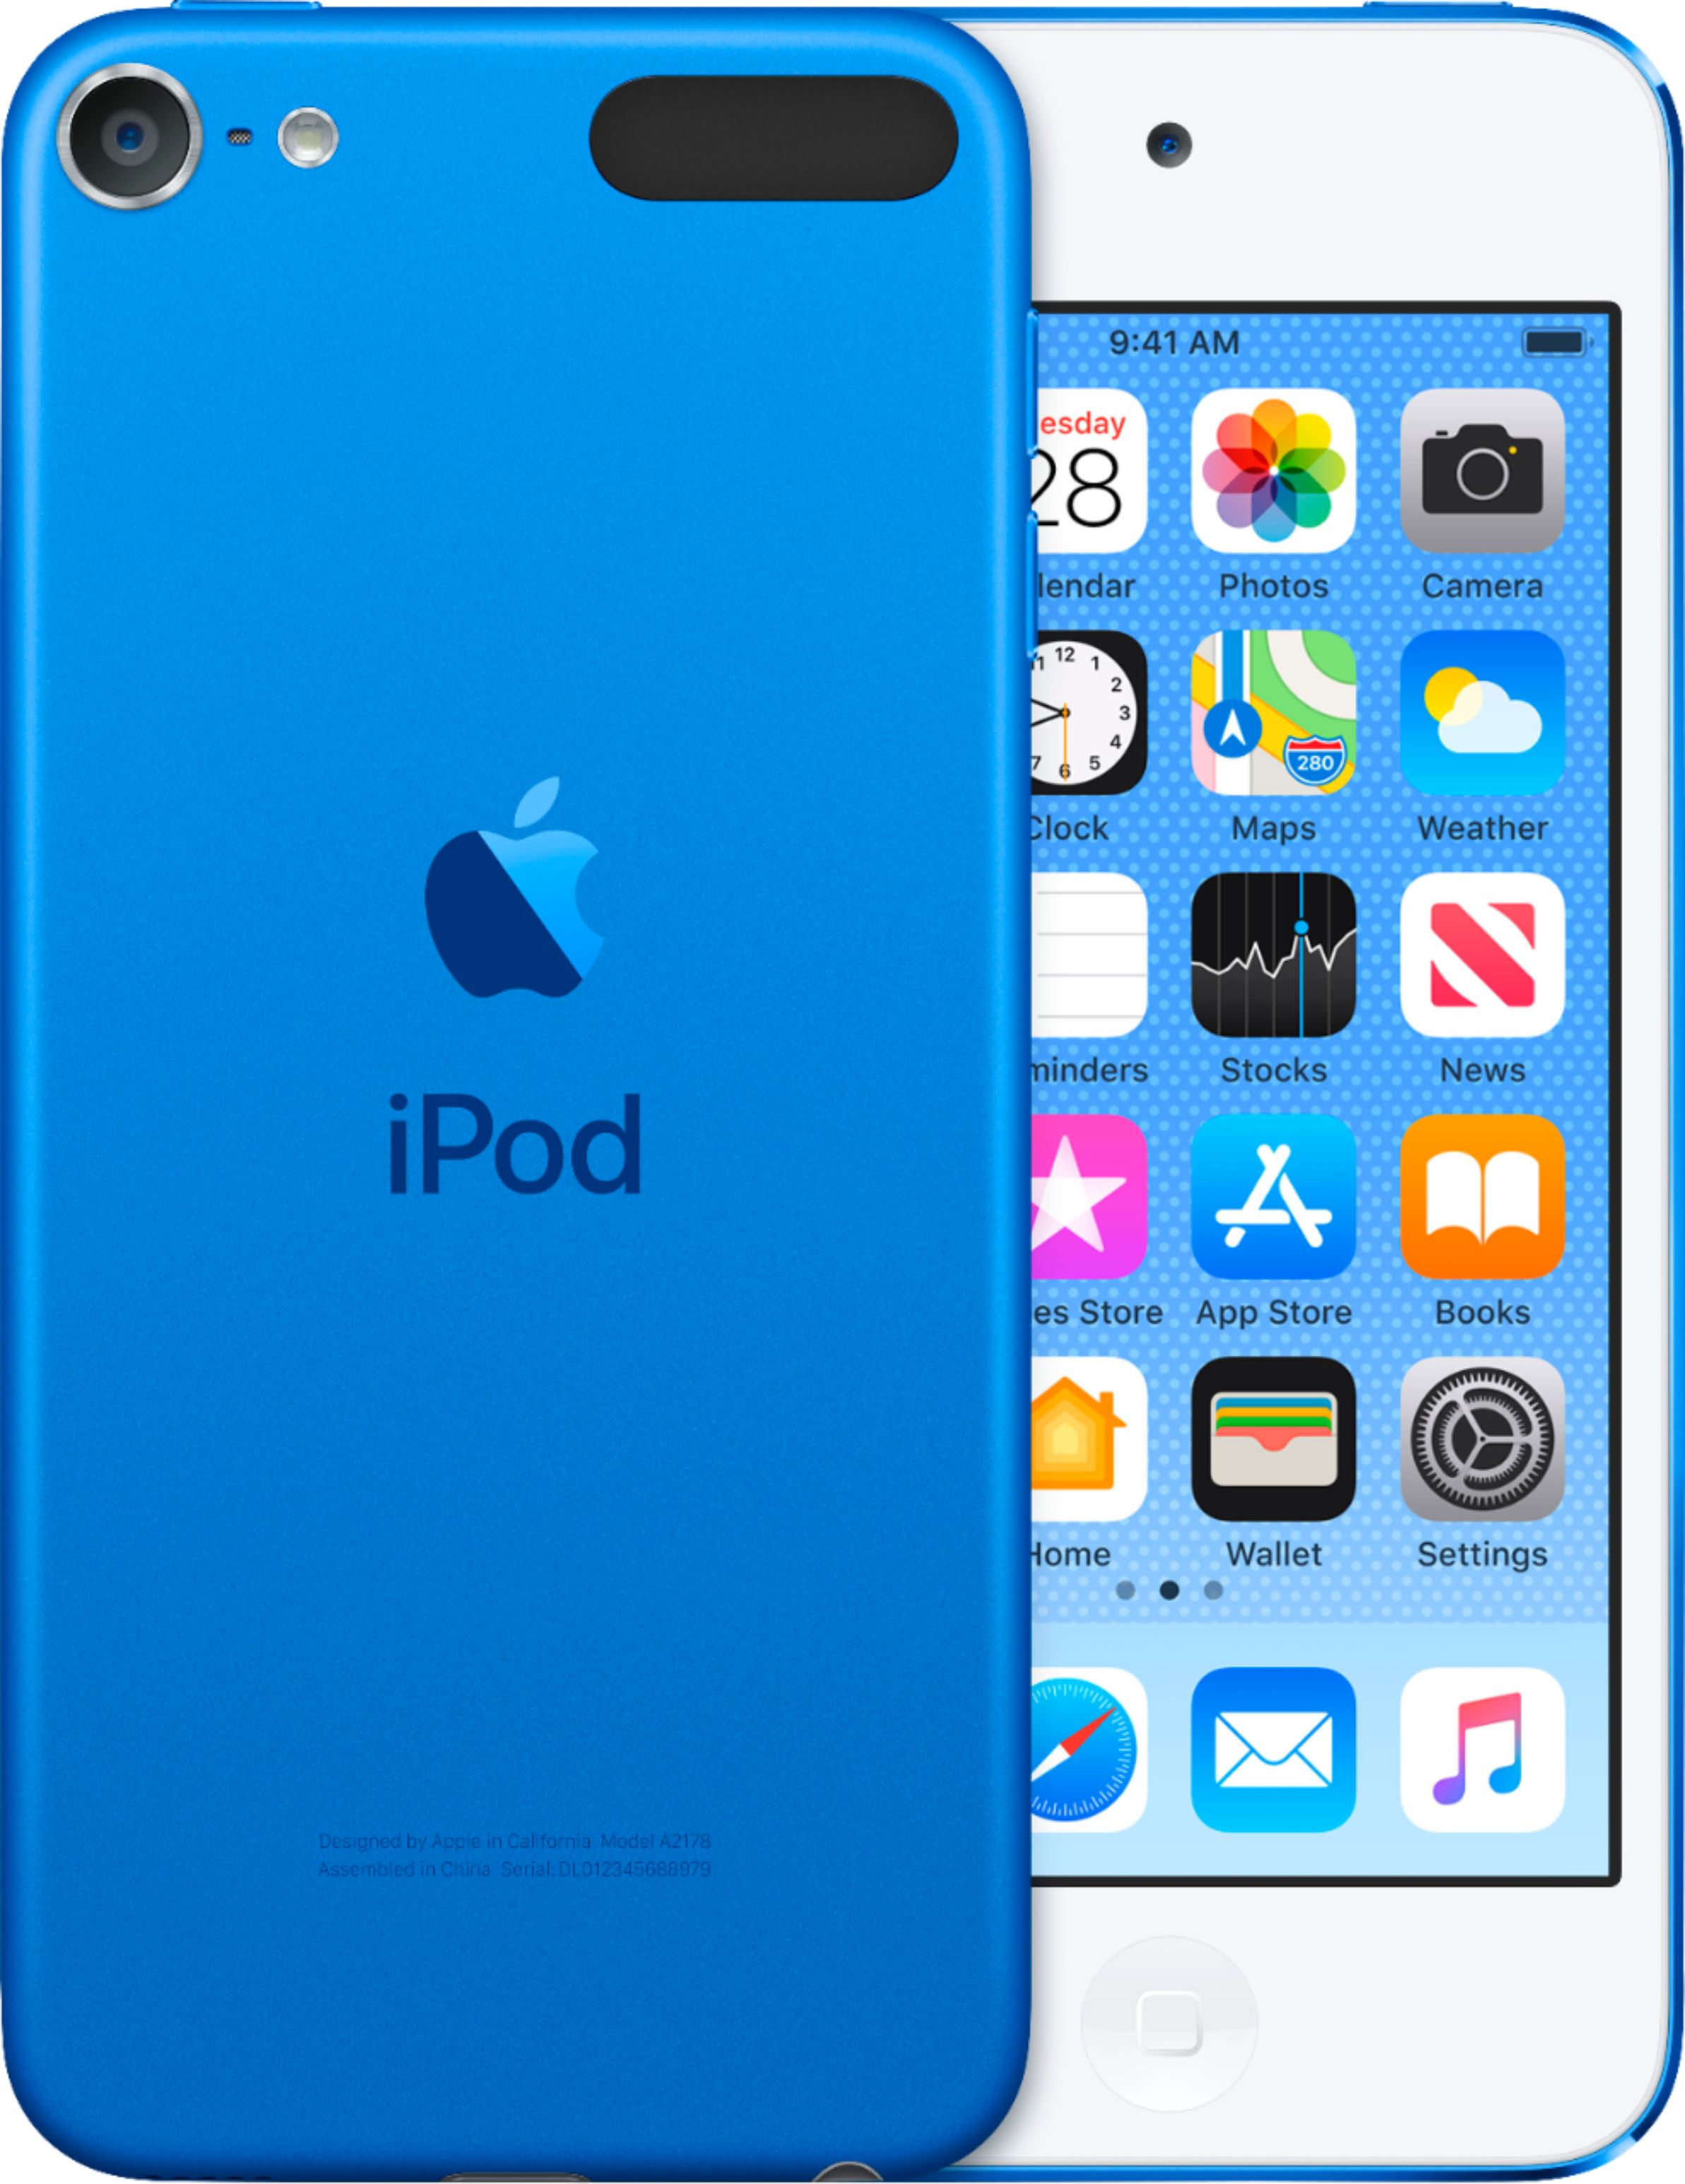 download the last version for ipod EdgeView 4